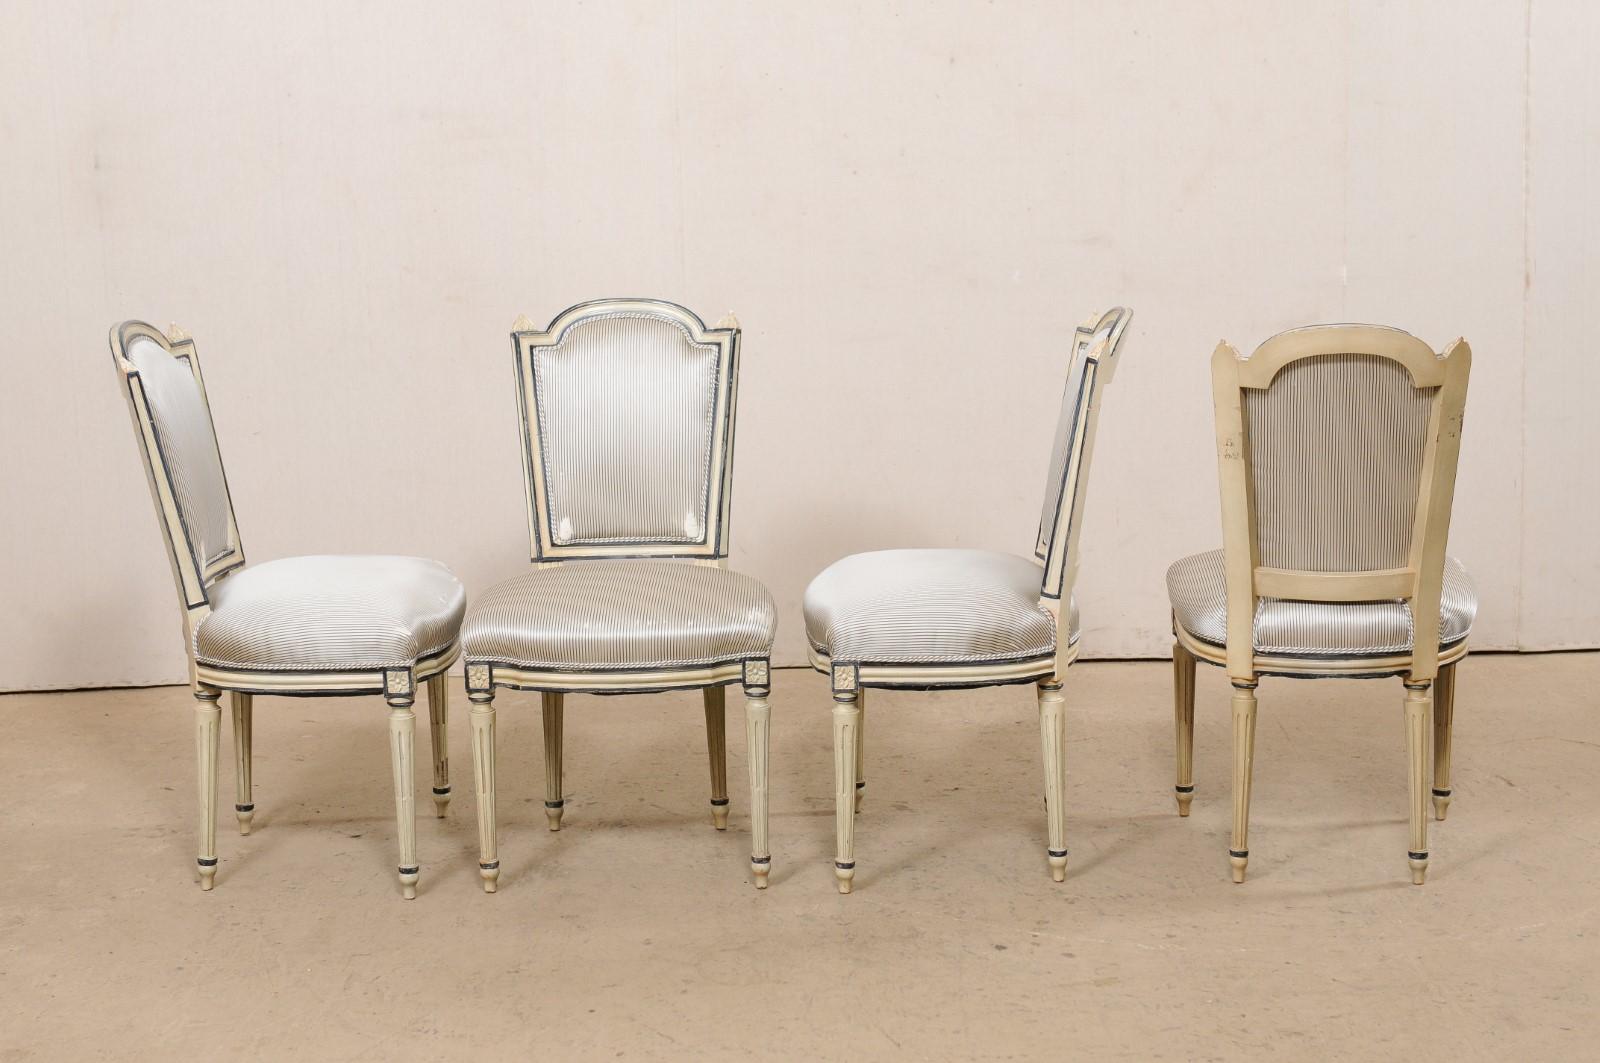 French Set of 4 Carved & Painted Wood & Upholstered Side Chairs, Mid 20th C For Sale 6